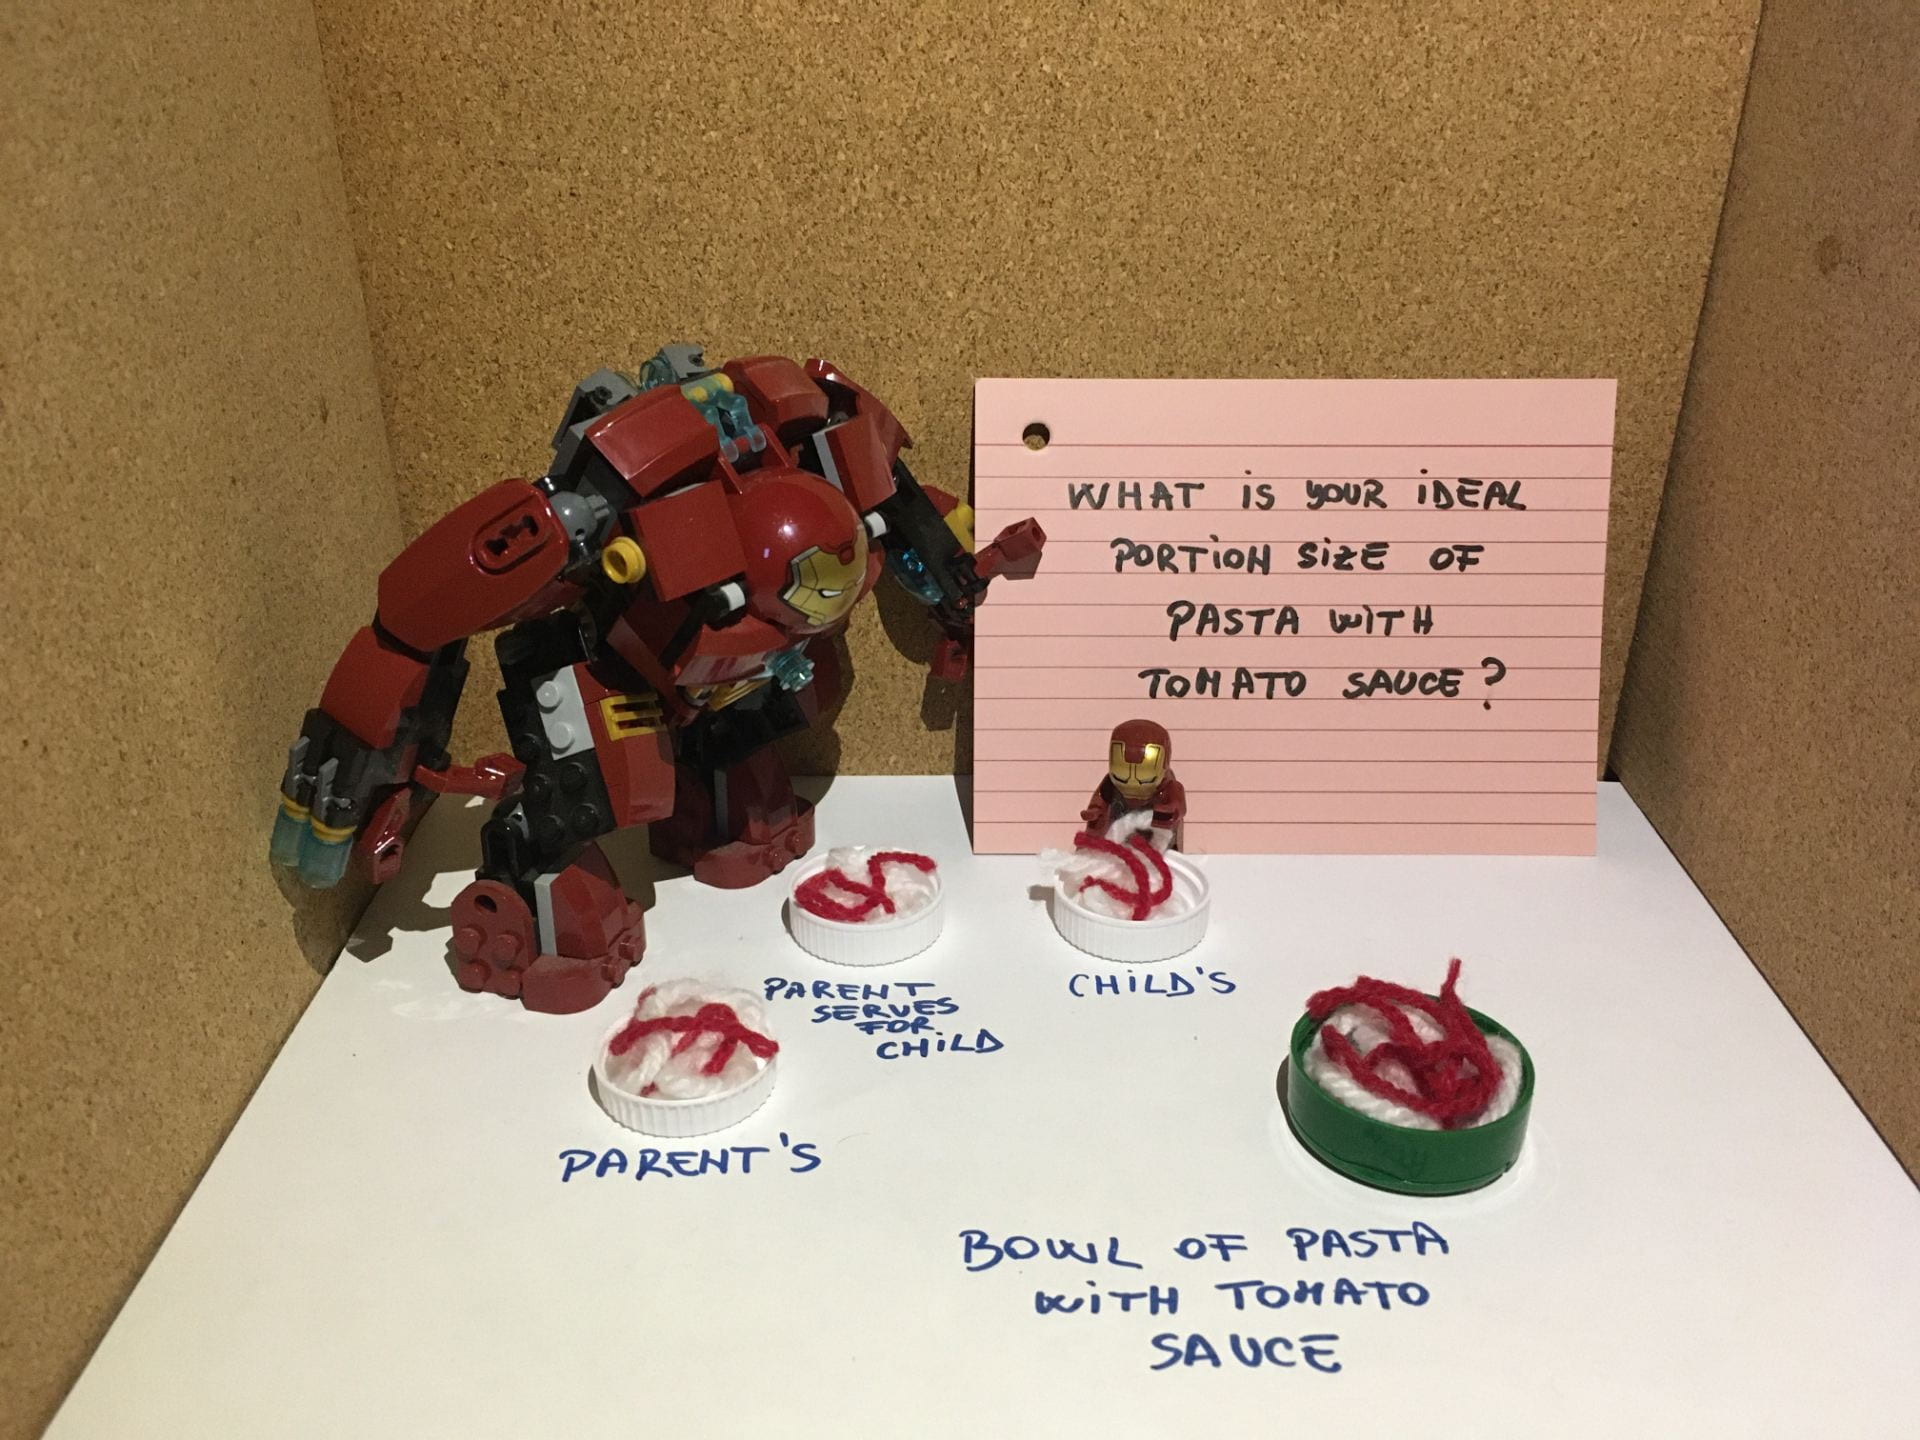 A large Iron Man toy holding a sign. The sign says 'What is your ideal portion size of pasta with tomato sauce?'. In front of this toy are four discs, each covered in wool - an effect designed to look like plates of food. The discs are labelled 'parent's', 'parent serves for child', 'child's' and 'bow;l of pasta with tomato sauce'. Next to the child's disc is a LEGO Iron Man.